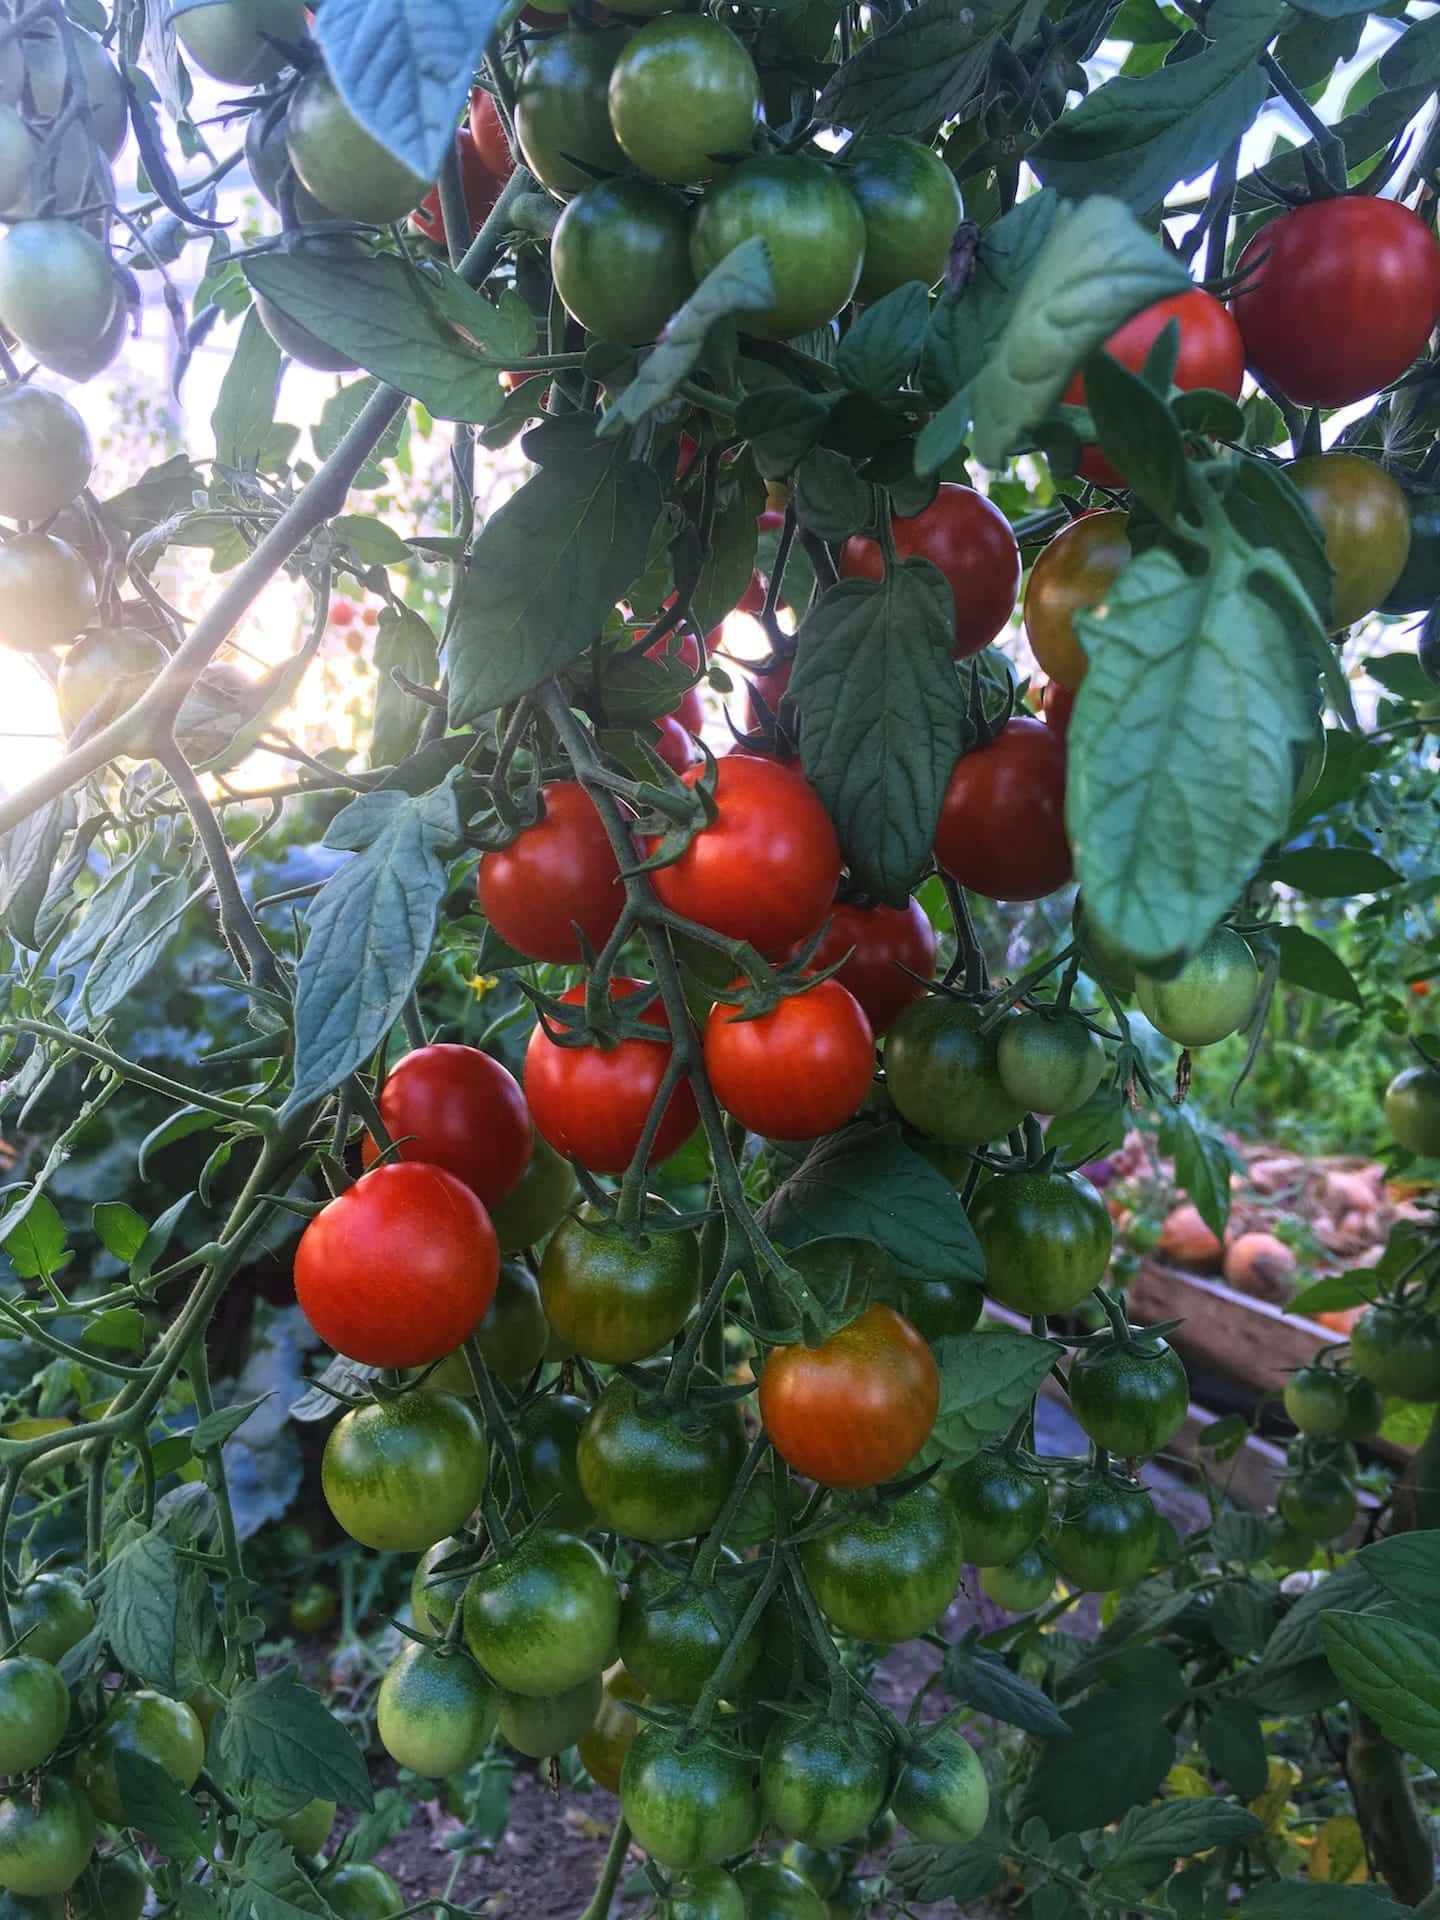 angelic tomatoes - Little Late Season Growth Spurt & Many Thanks — Knuckle Down News, Week 17